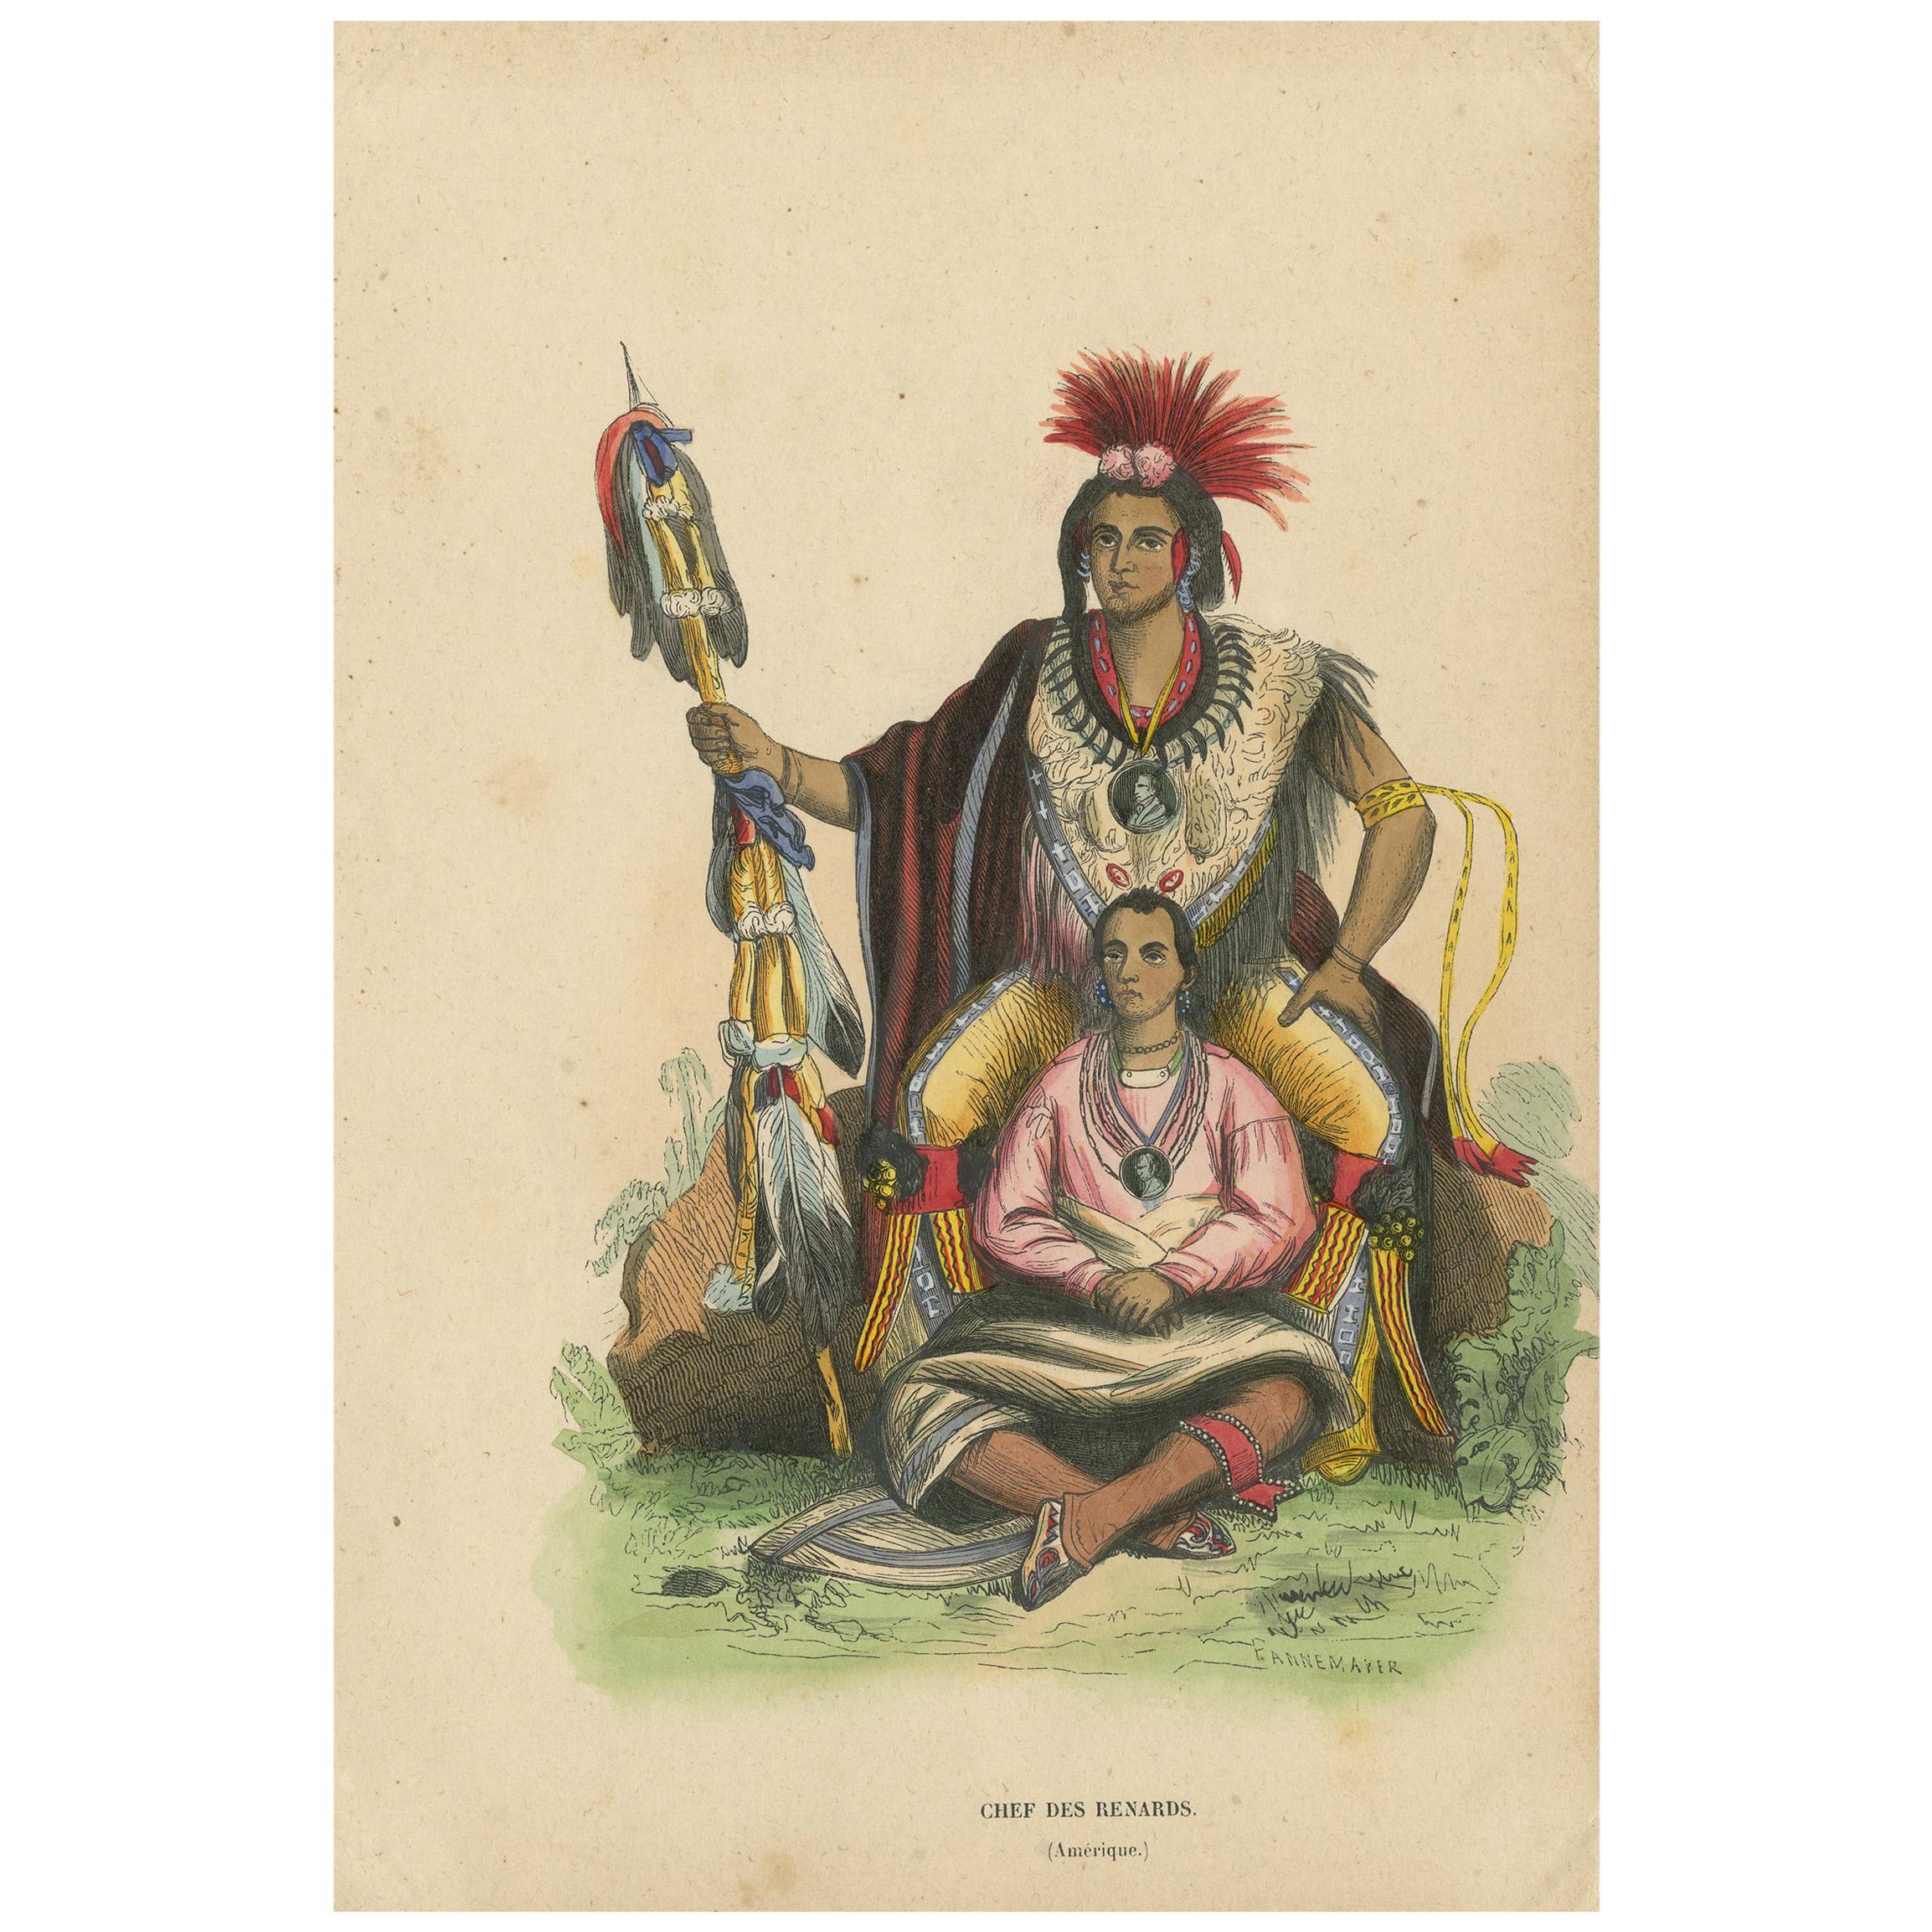 Antique Costume Print of a Meskwaki Chief by Wahlen, 1843